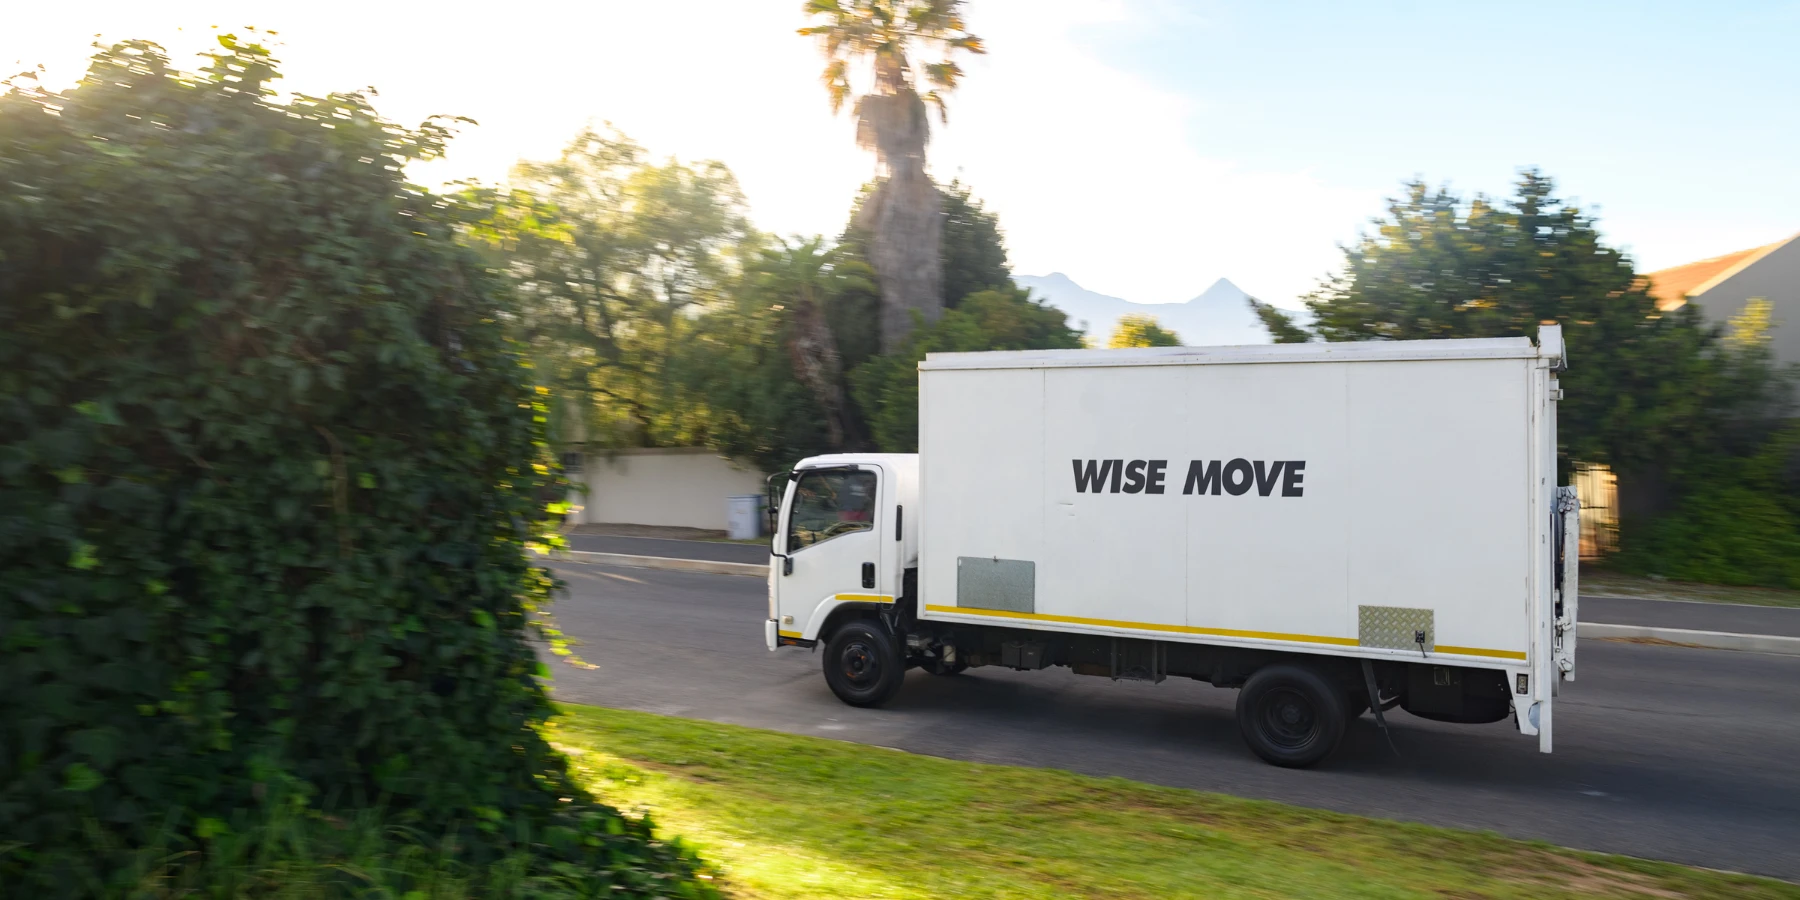 10 International Moving Tips For A Smooth Move Overseas